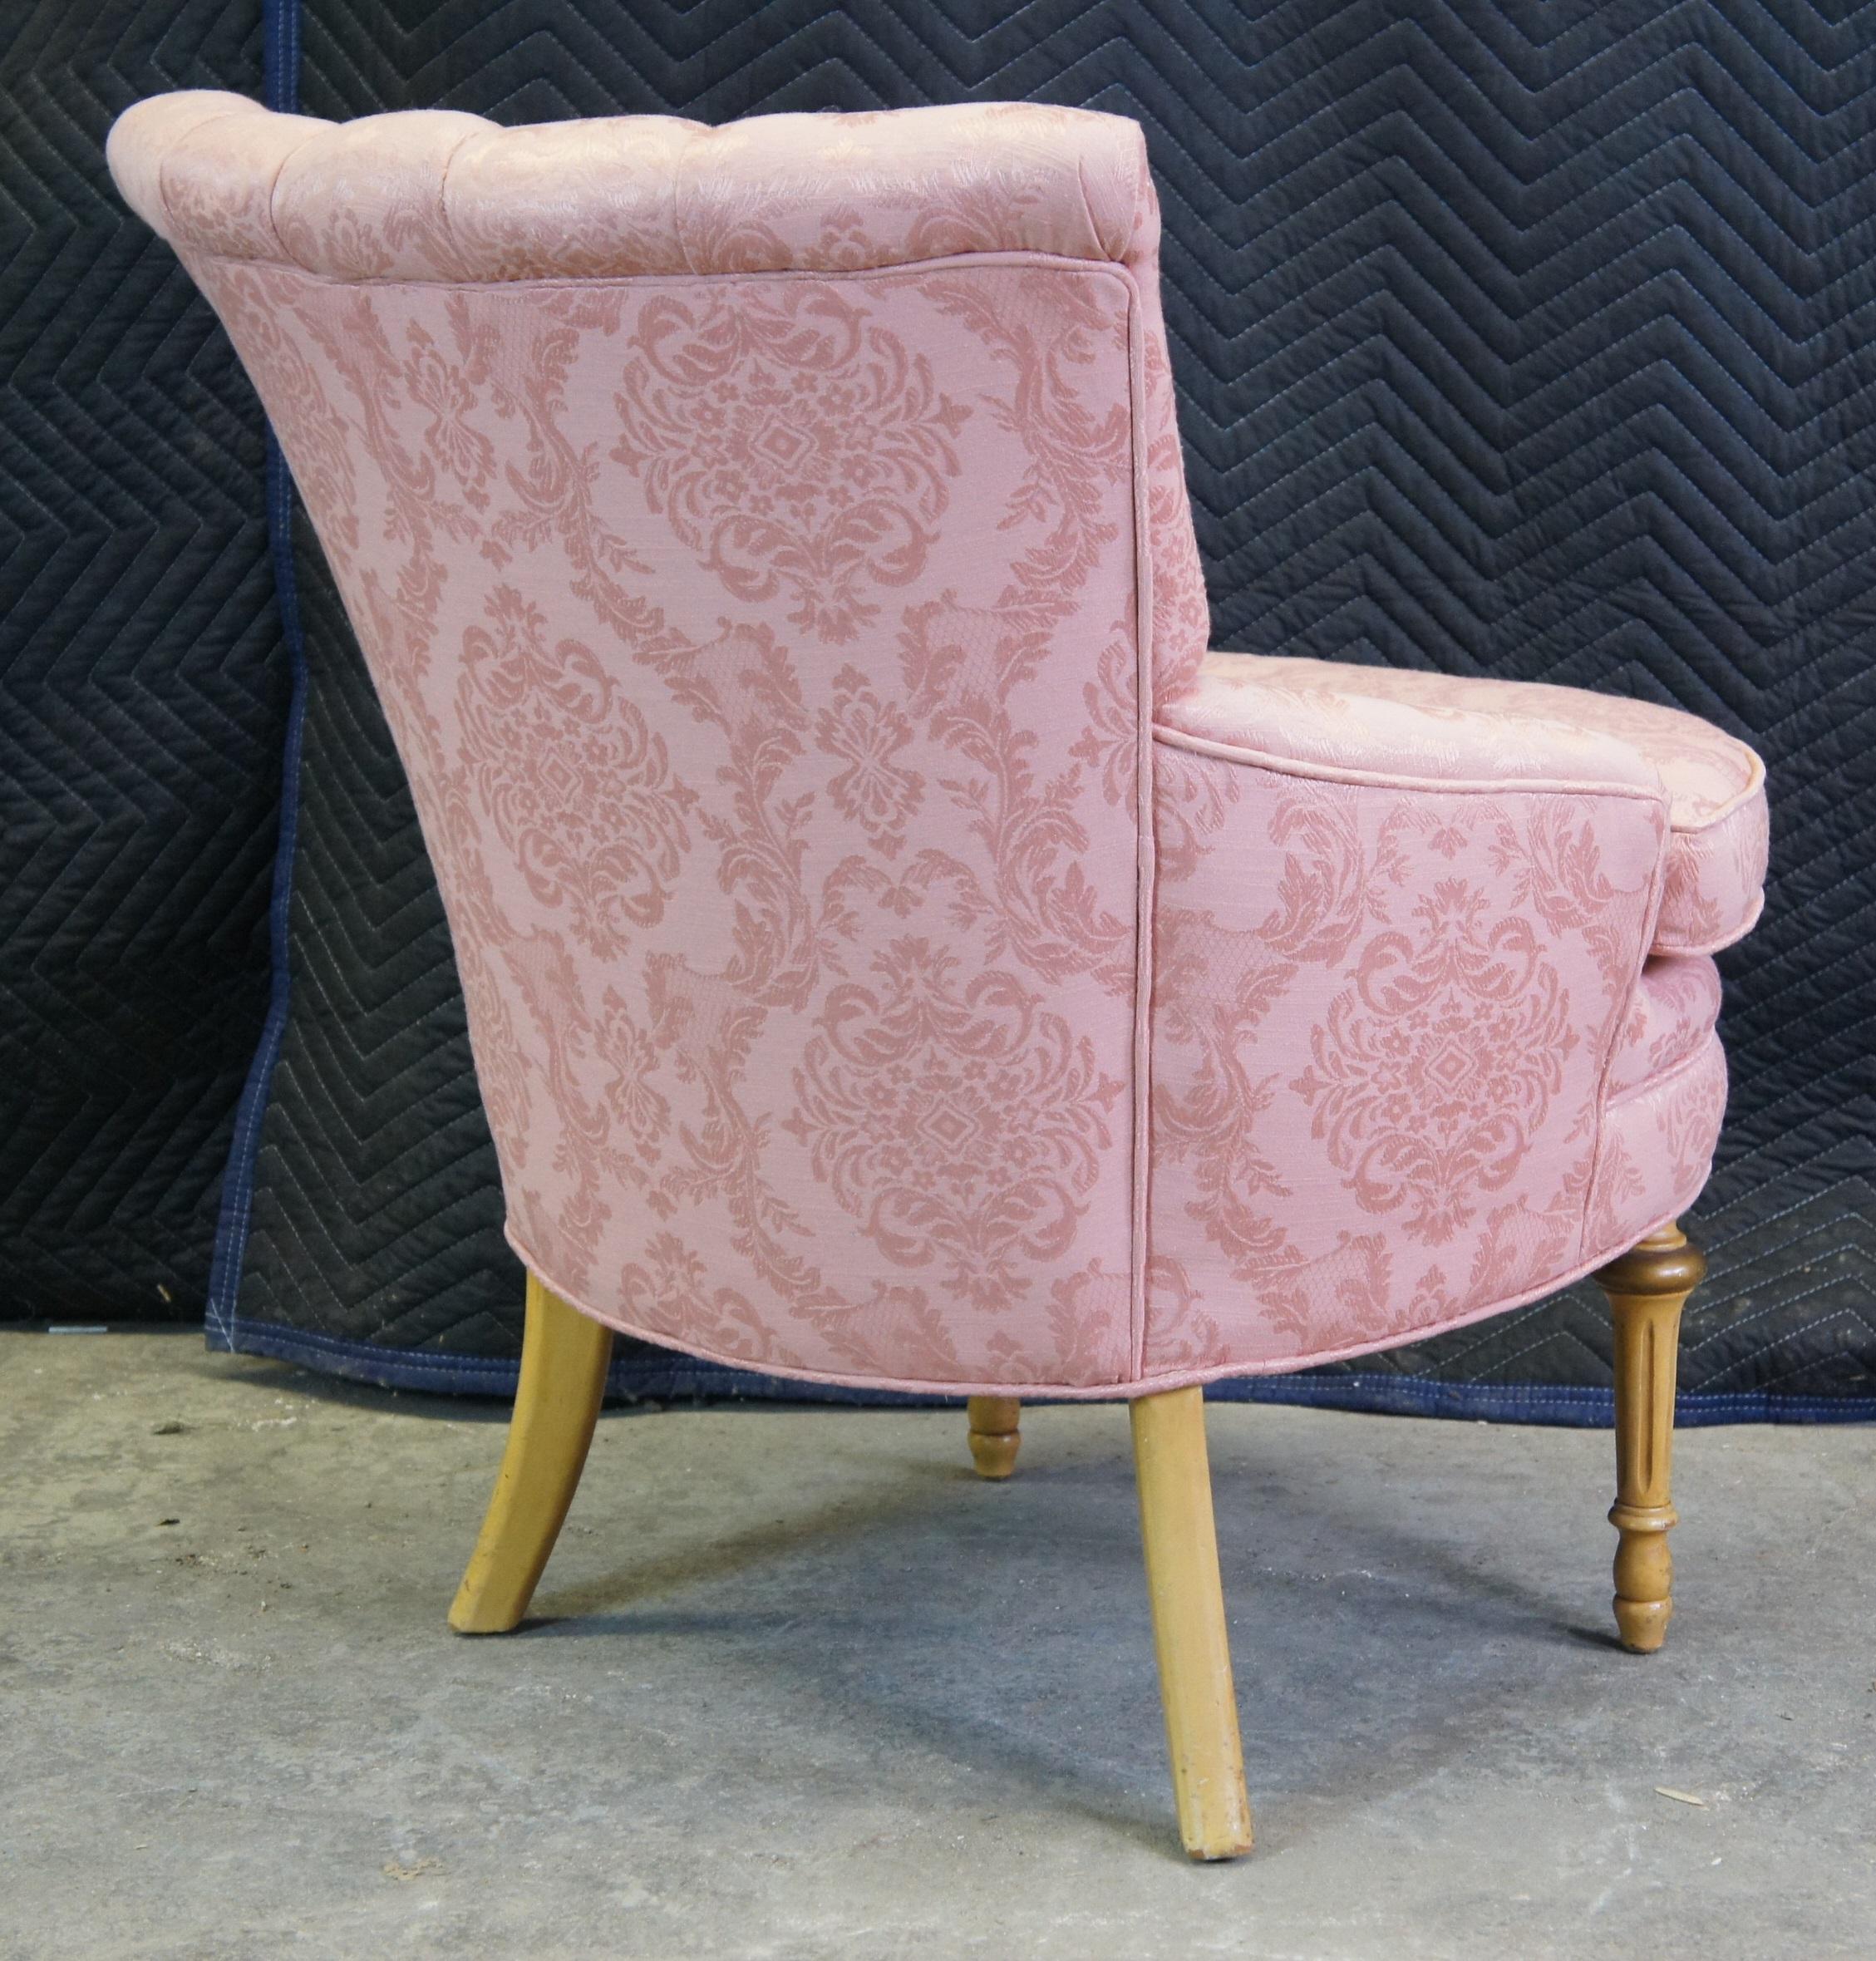 Antique Robert W Irwin French Provincial Channel Back Vanity Chair Pink Brocade 1